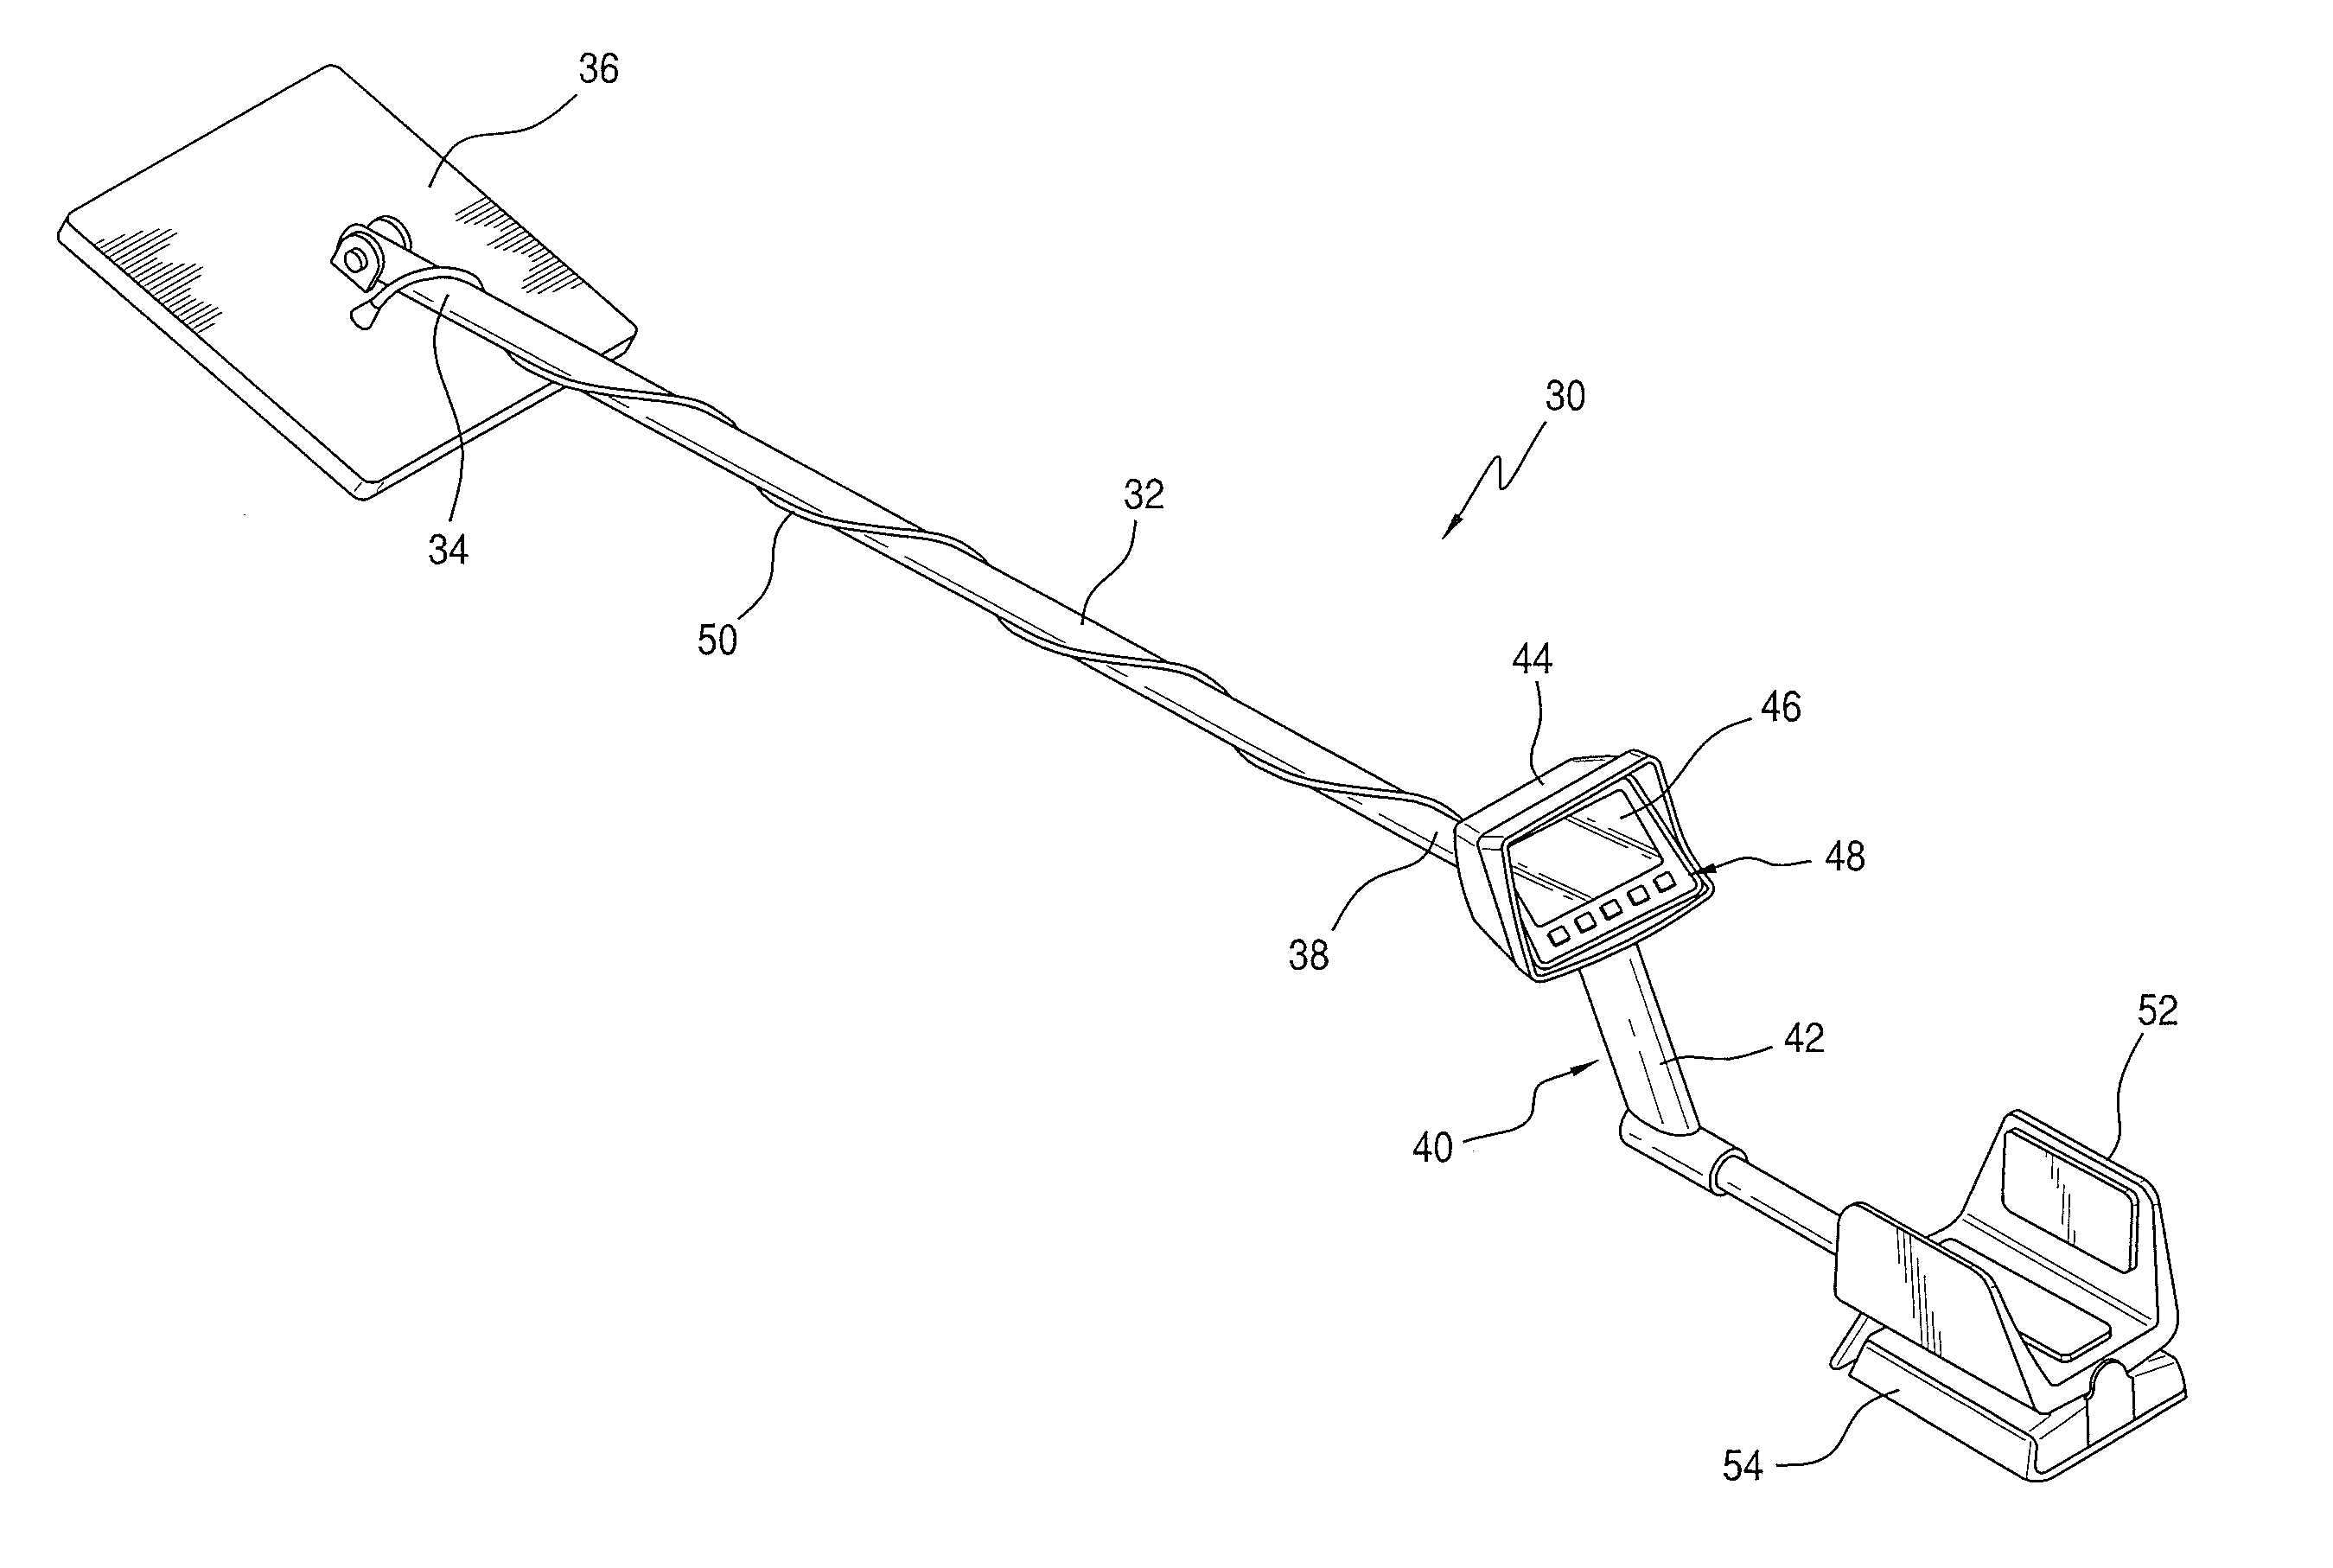 Metal Object or Feature Detection Apparatus and Method